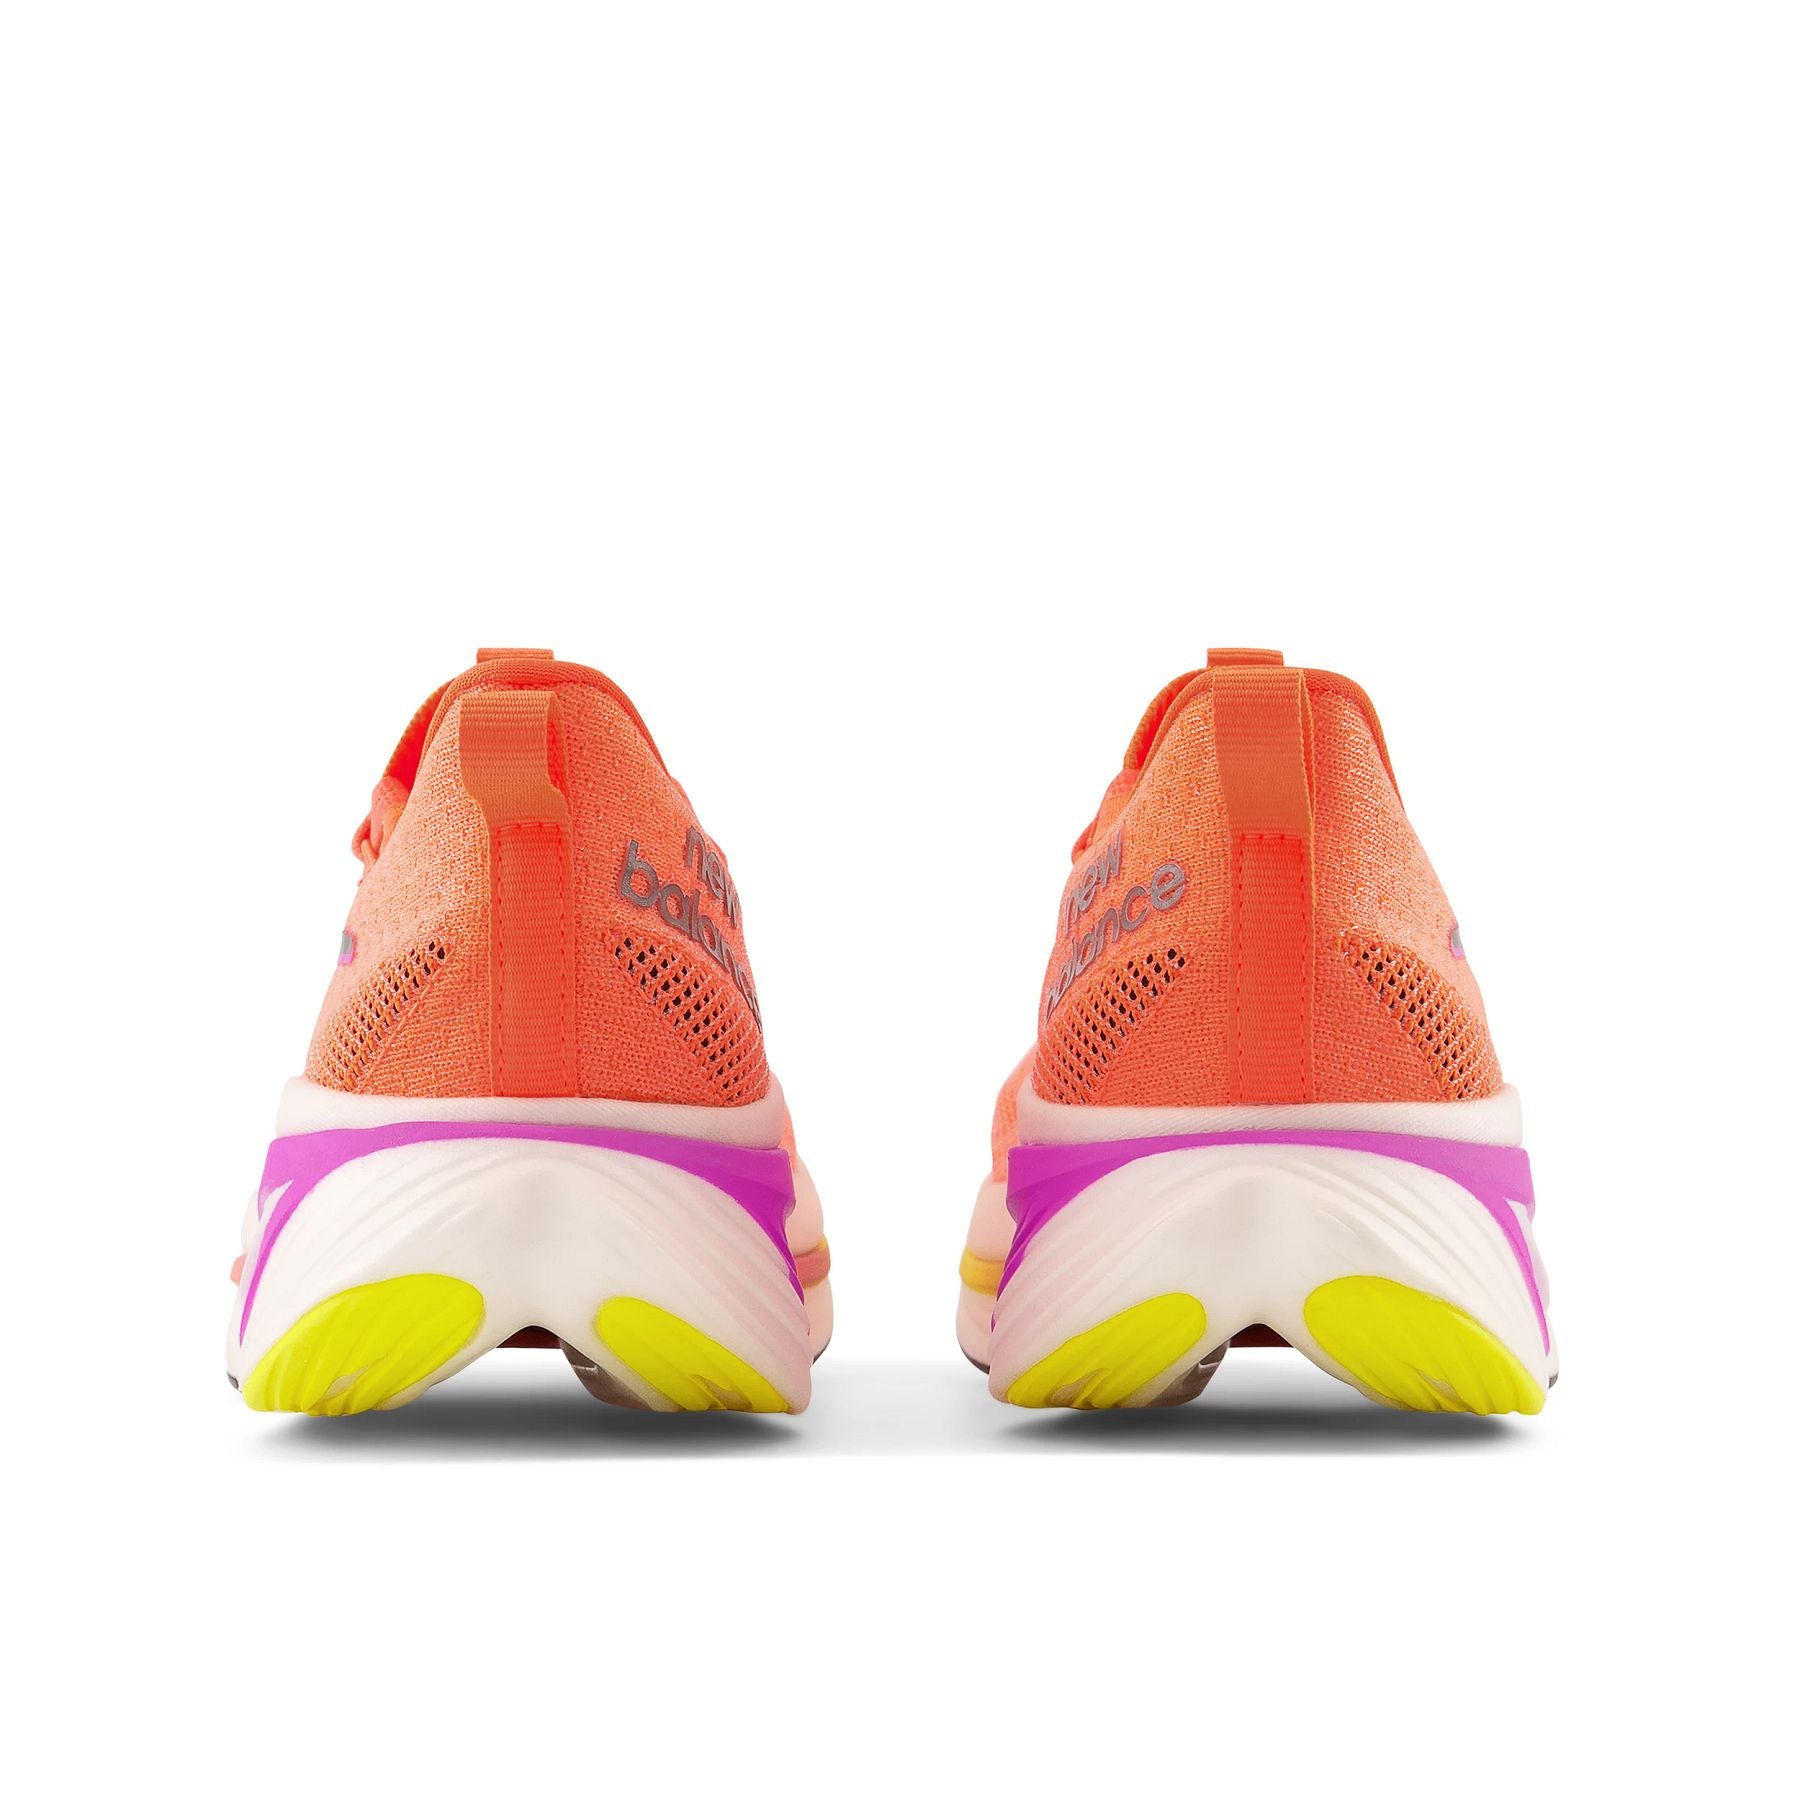 Back view of the New Balance Women's FuelCell SuperComp Elite V3 in the color Cosmic Rose/Neon dragonfly/Cosmic pineapple